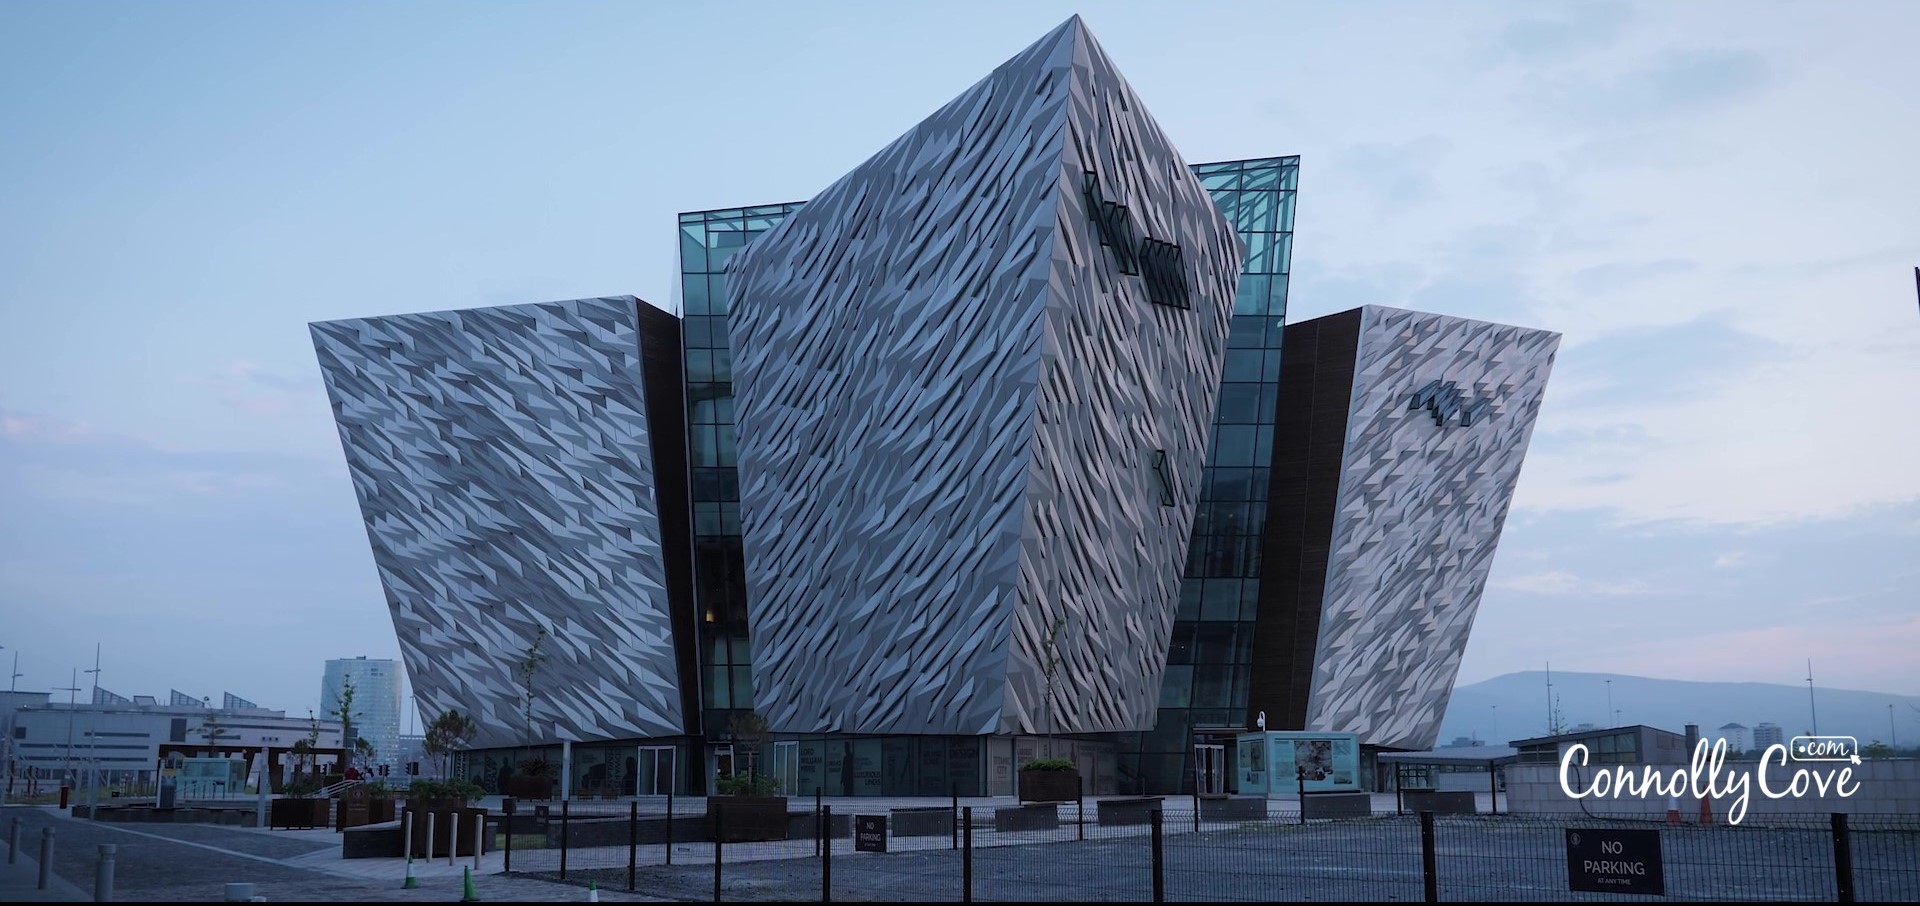 titanic studios Check out our ultimate guide to things to do in Belfast, we have made note of all the best attractions that you need to visit while on your visit to Belfast, Northern Ireland. So much to see and you won't be bored in Belfast we can promise that!